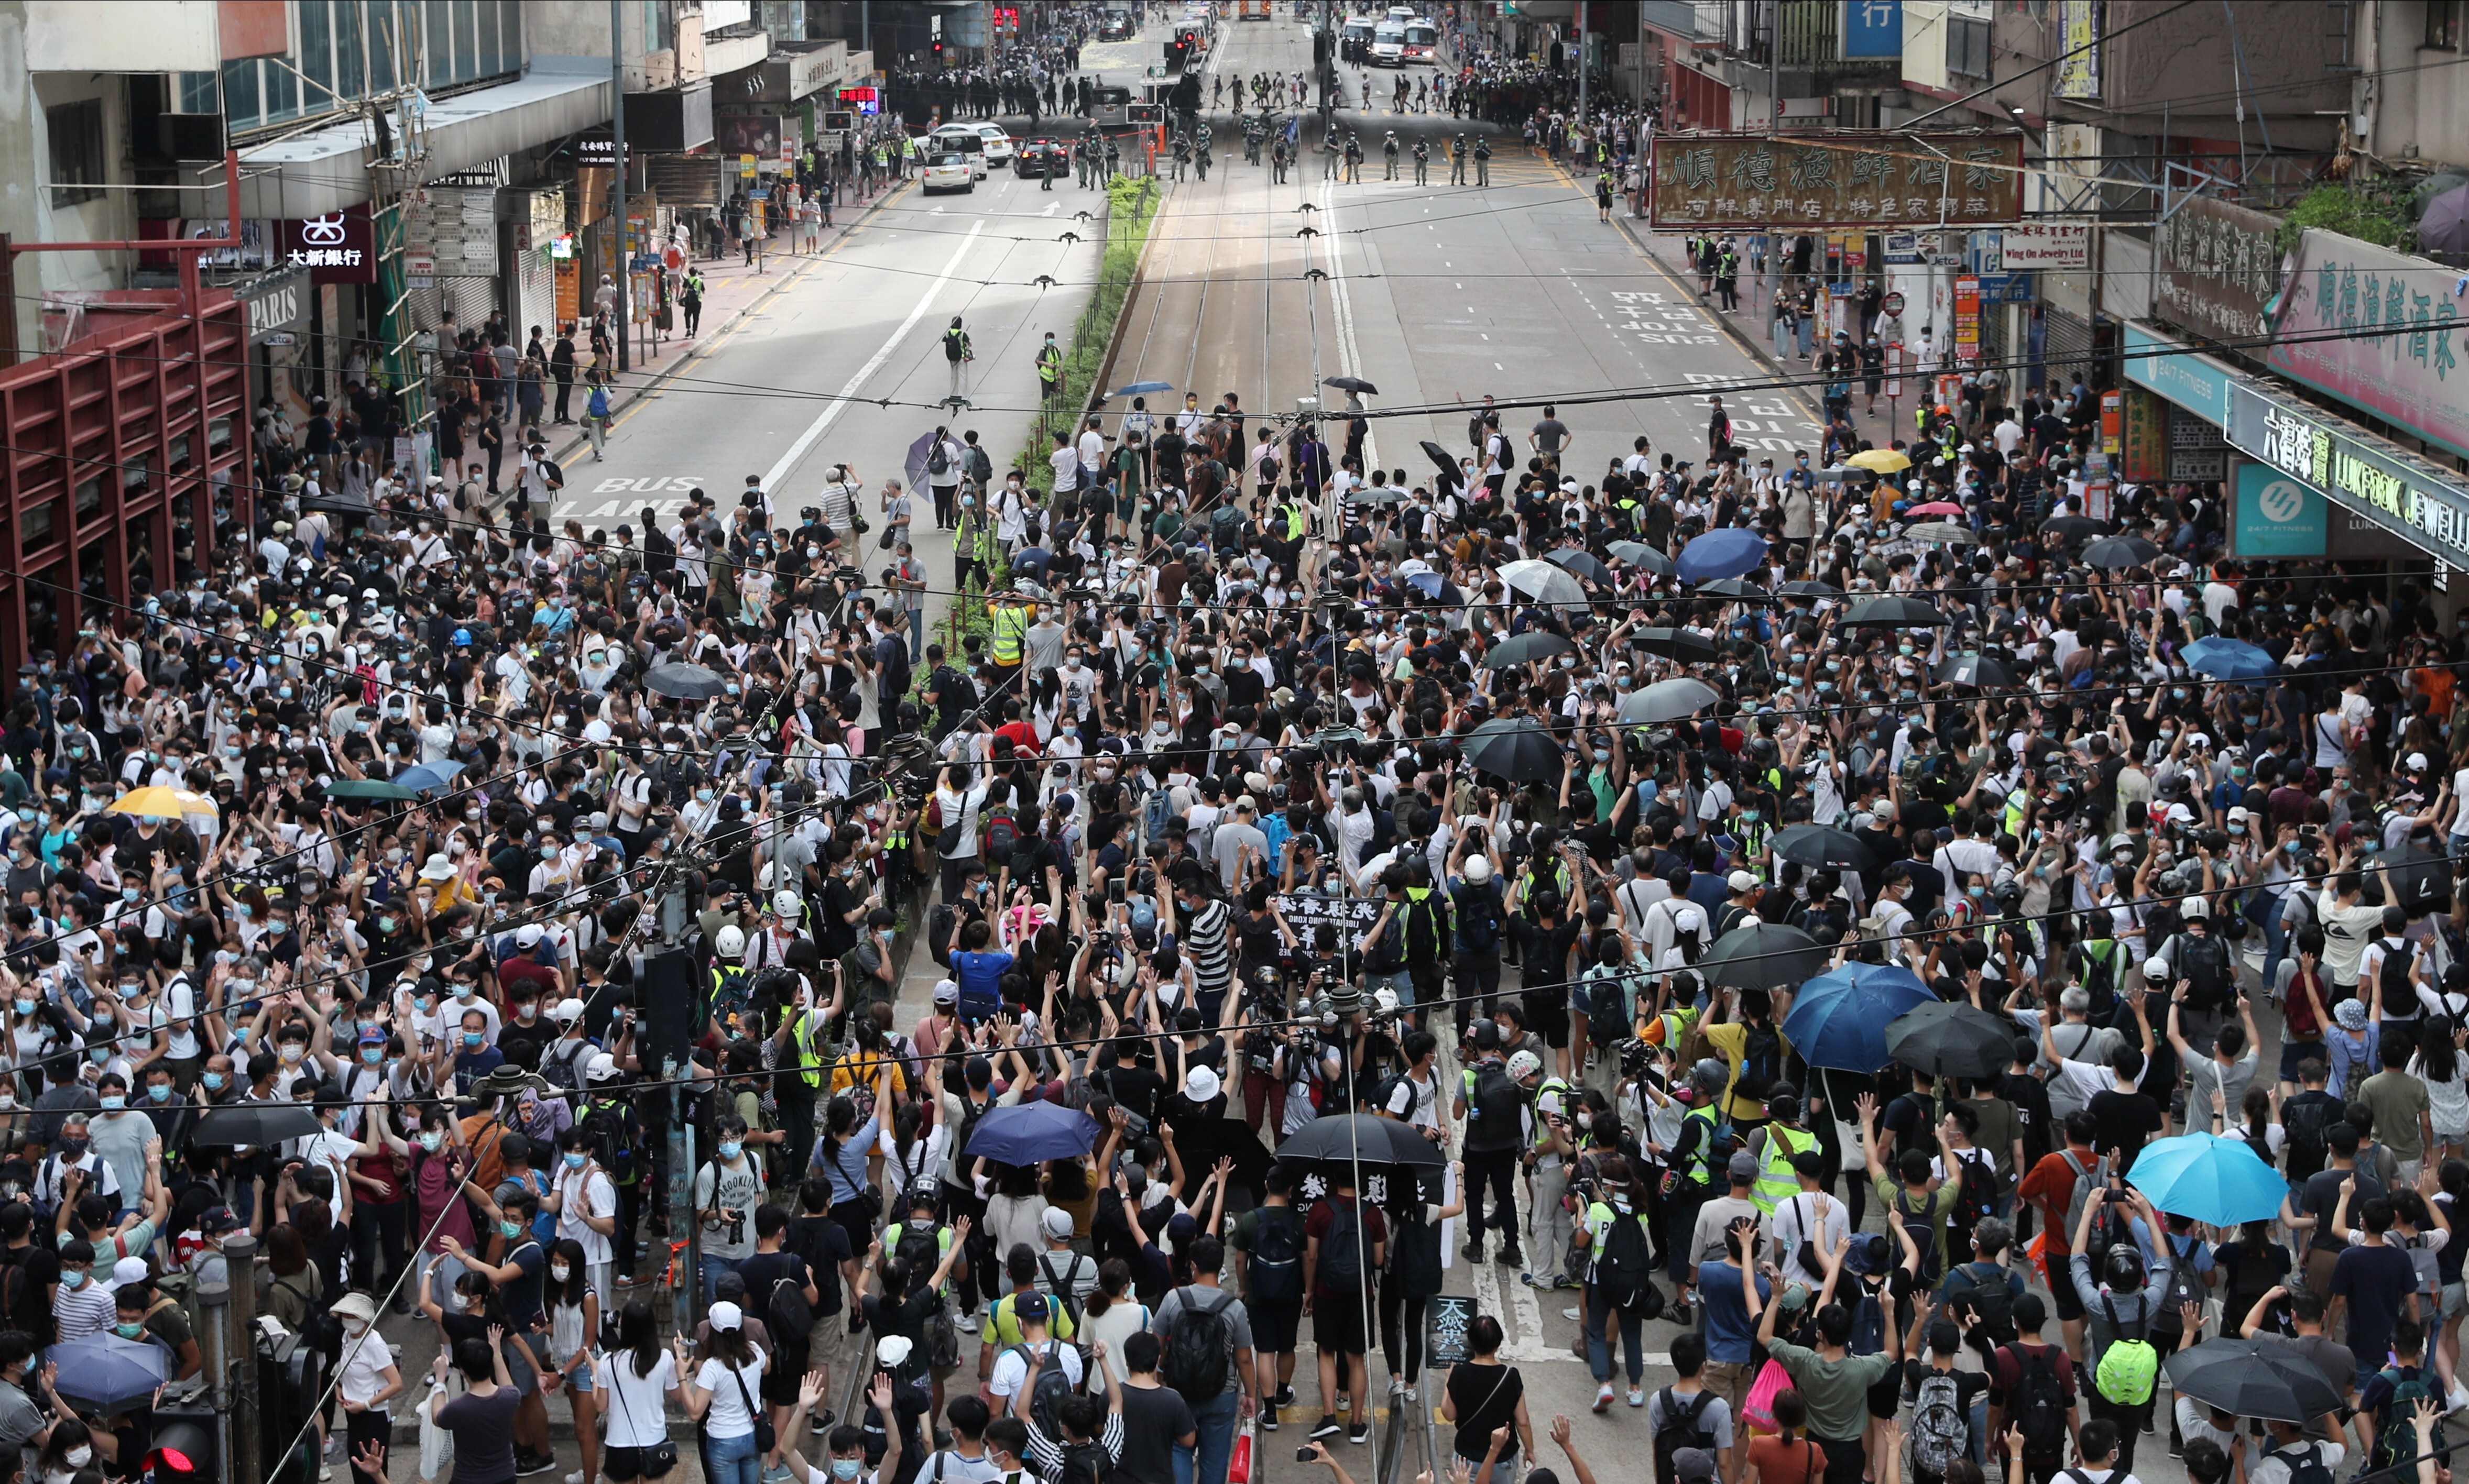 A crowd of anti-government protesters gather on Hennessy Road in Causeway Bay during an illegal march on July 1. Photo: Sam Tsang